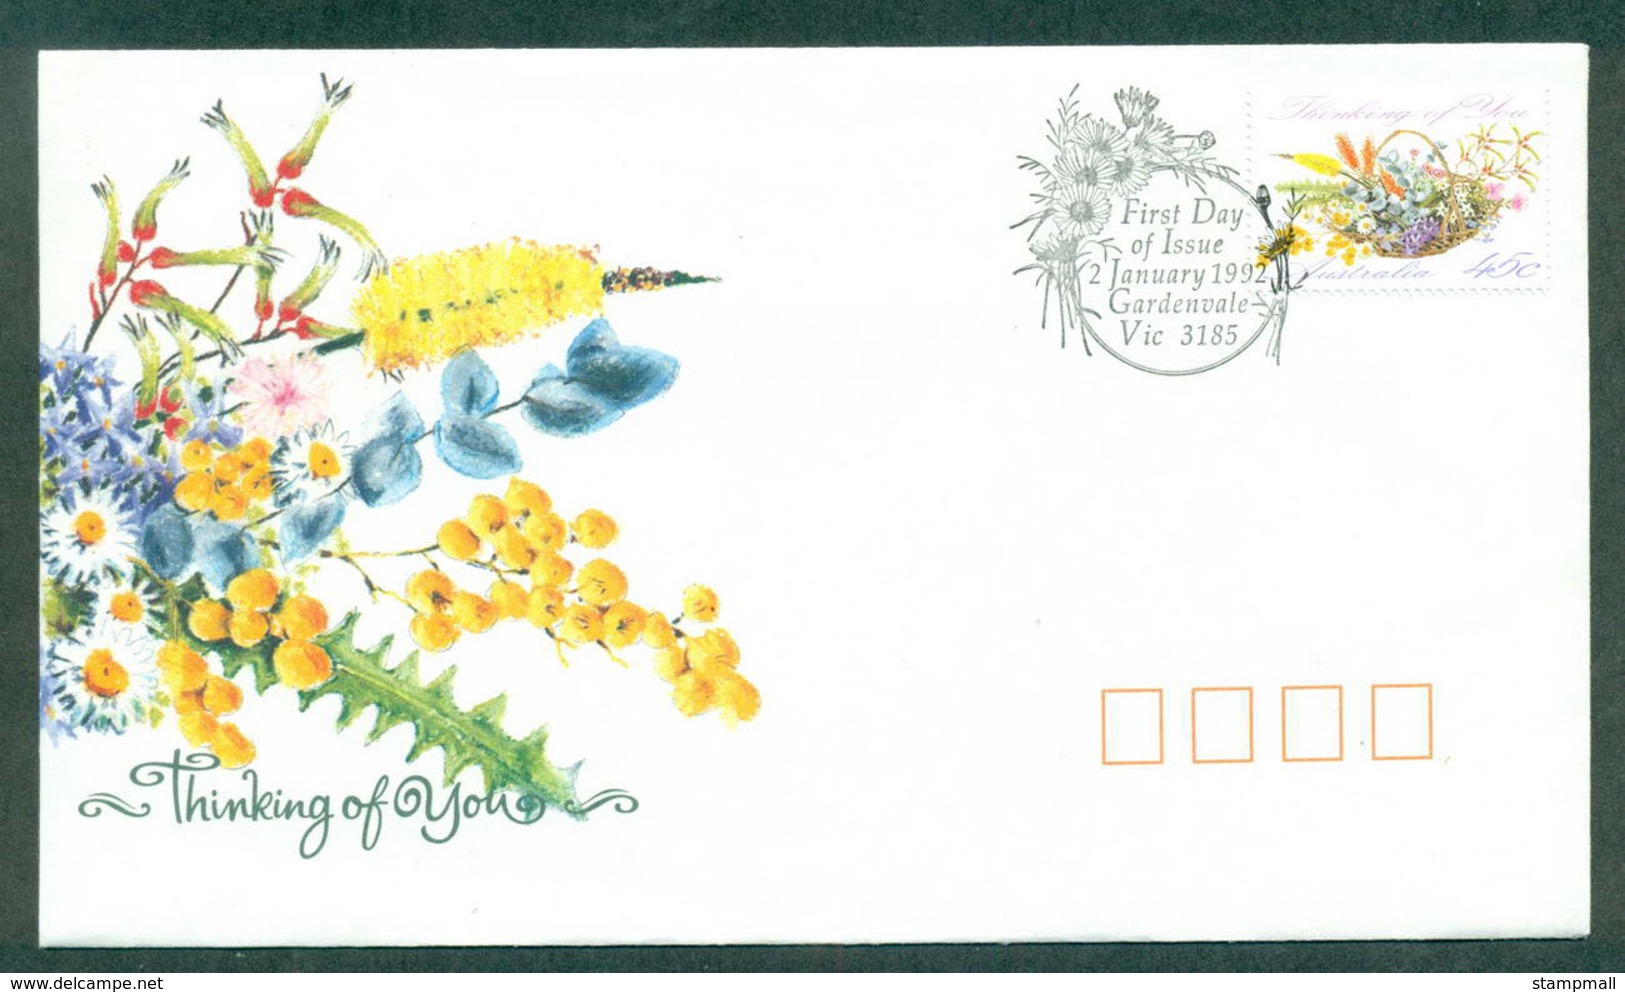 Australia 1992 Thinking Of You, Gardenvale FDC Lot52395 - Covers & Documents